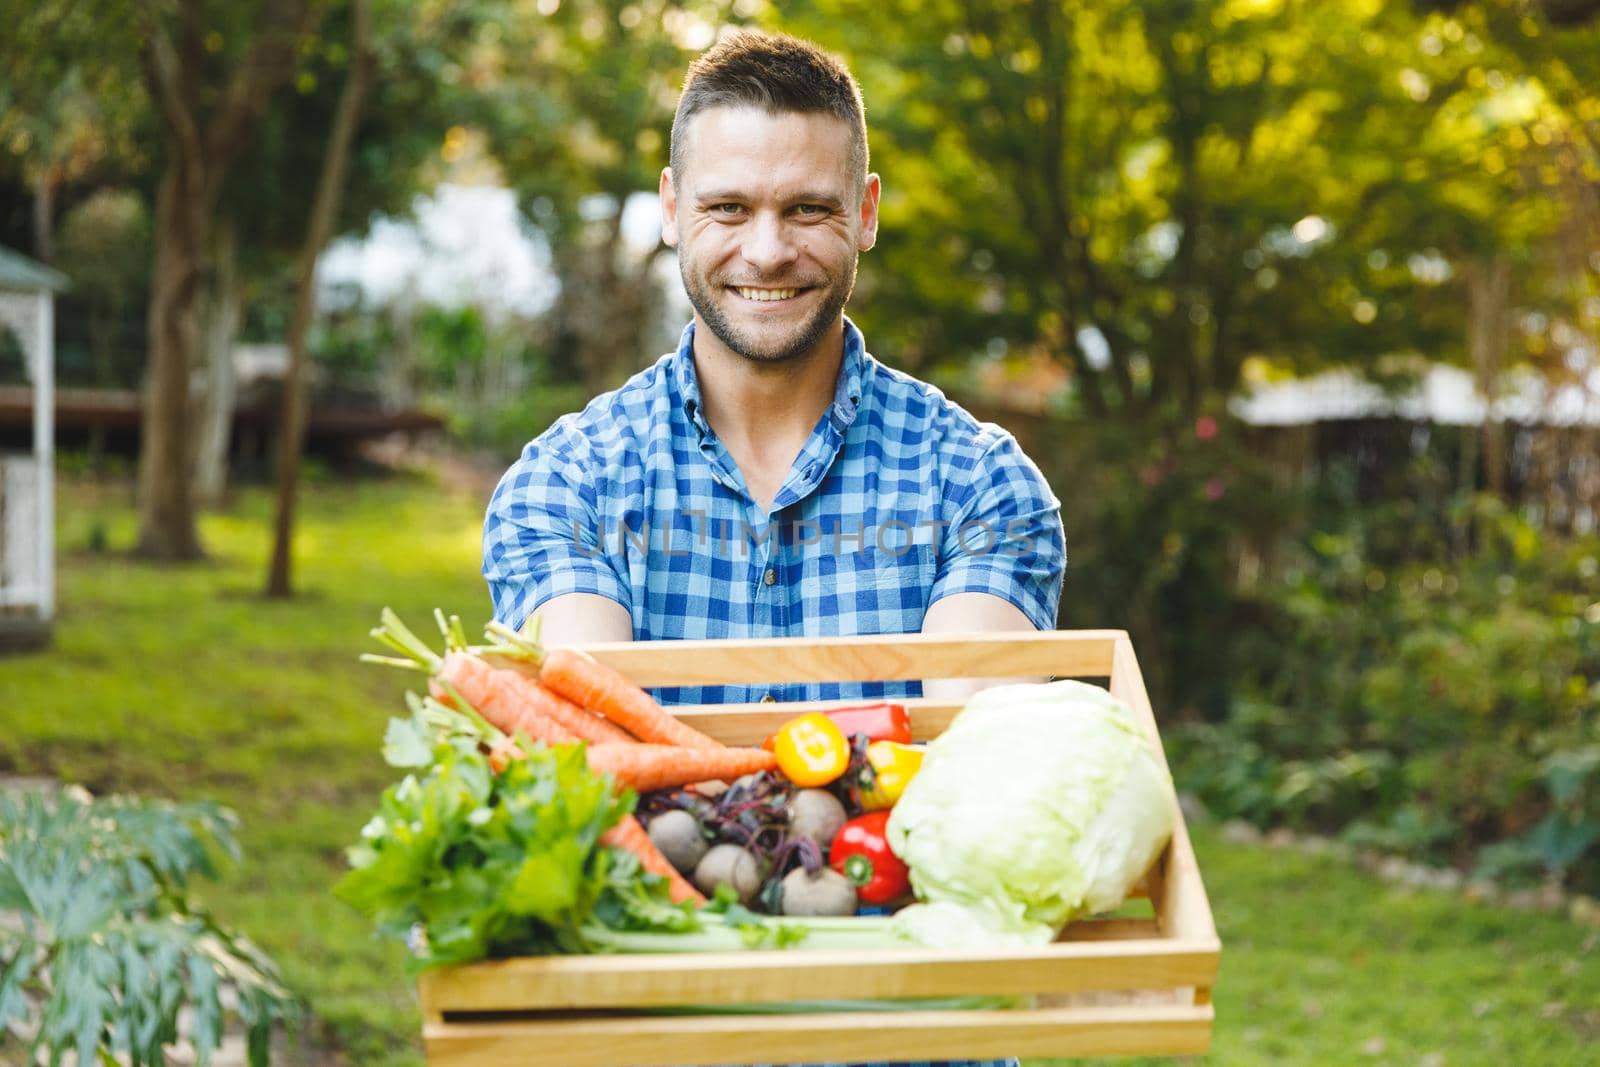 Portrait of smiling caucasian man standing in garden holding box of fresh organic vegetables. gardening, self sufficiency and growing home produce.